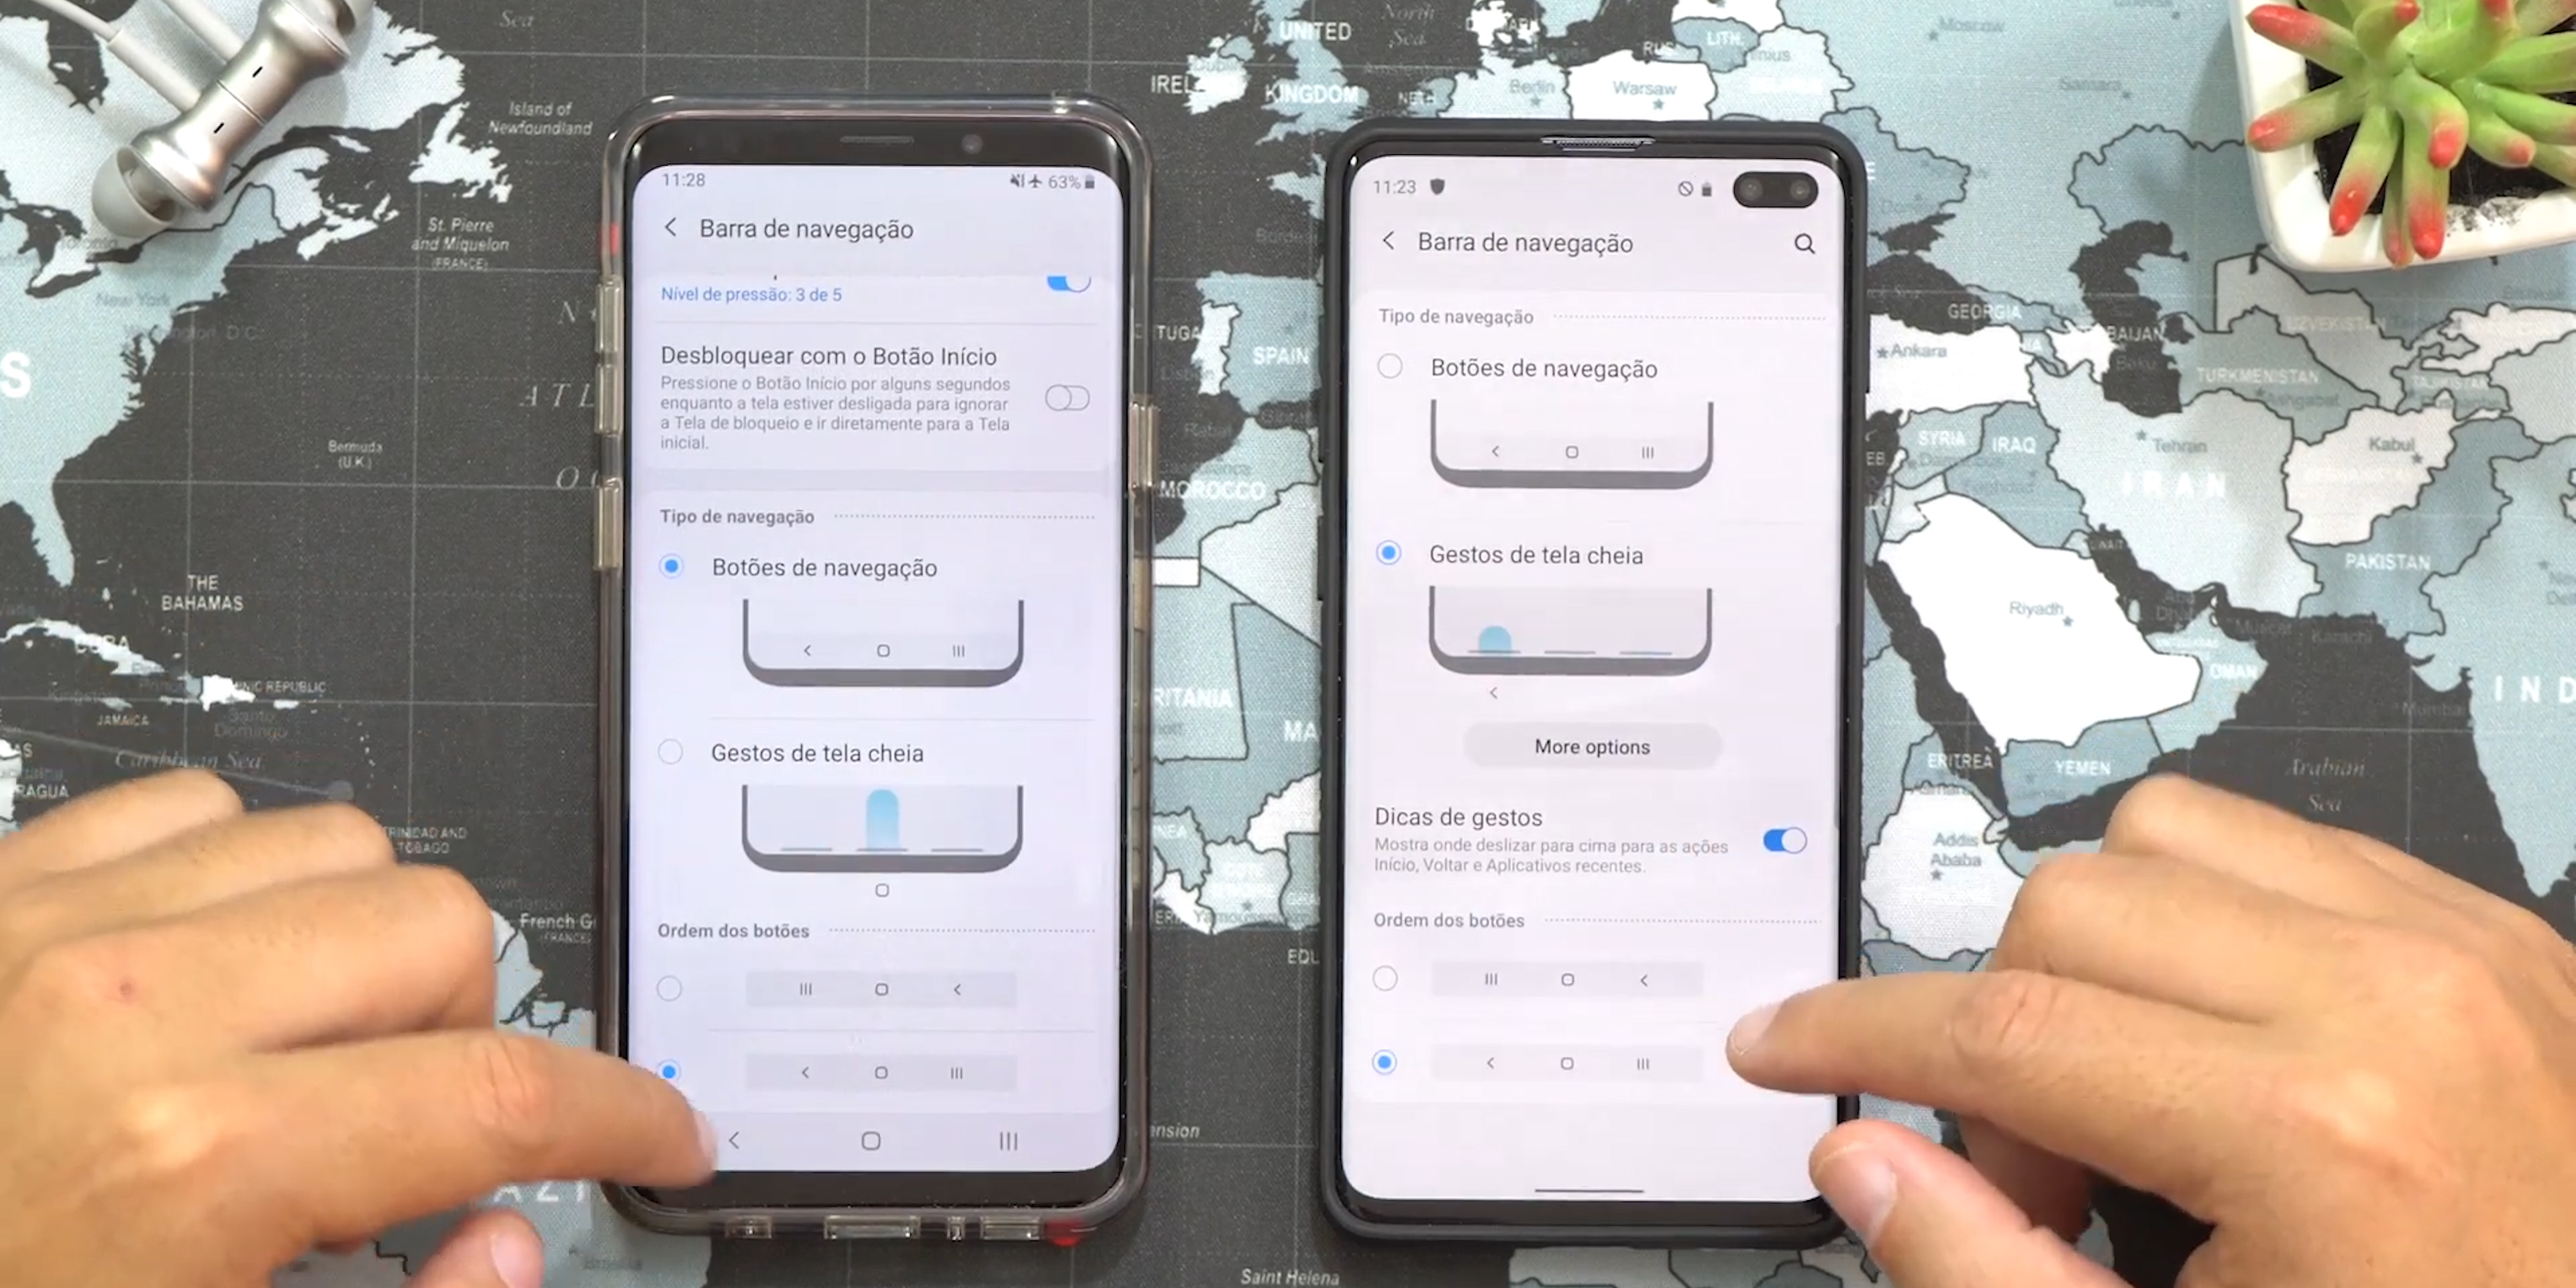 One UI 2.0 Android 10 gestures Samsung Galaxy S10+